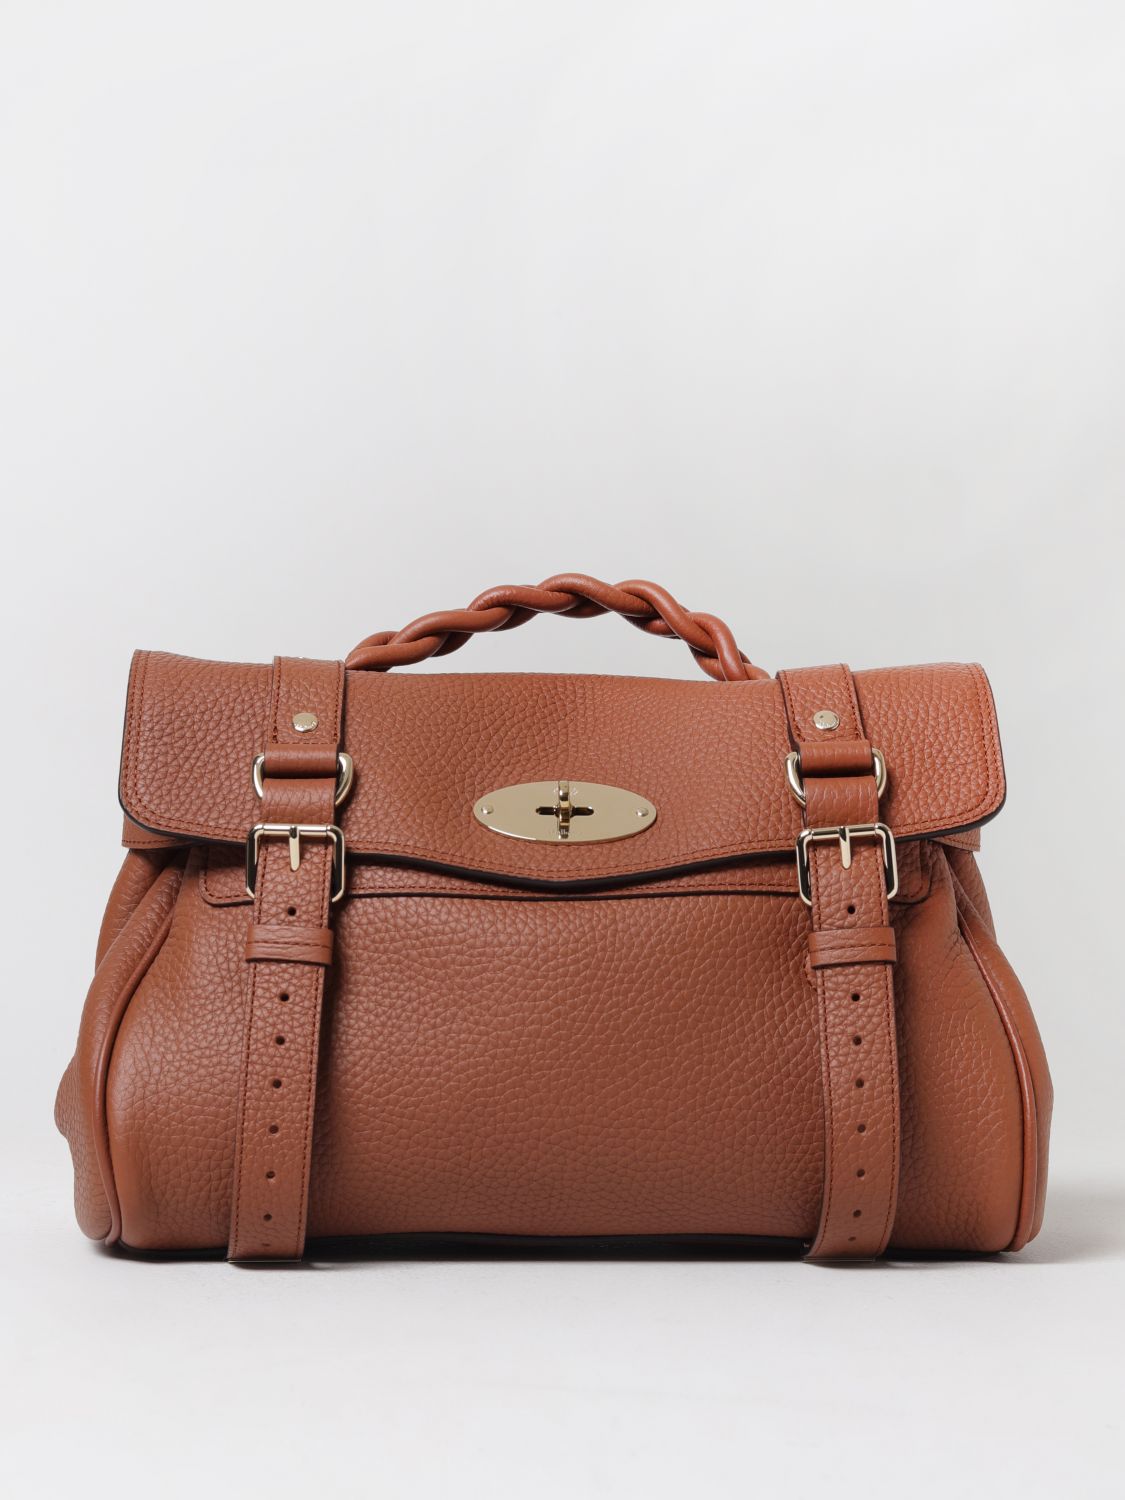 Mulberry Handbag MULBERRY Woman colour Brown